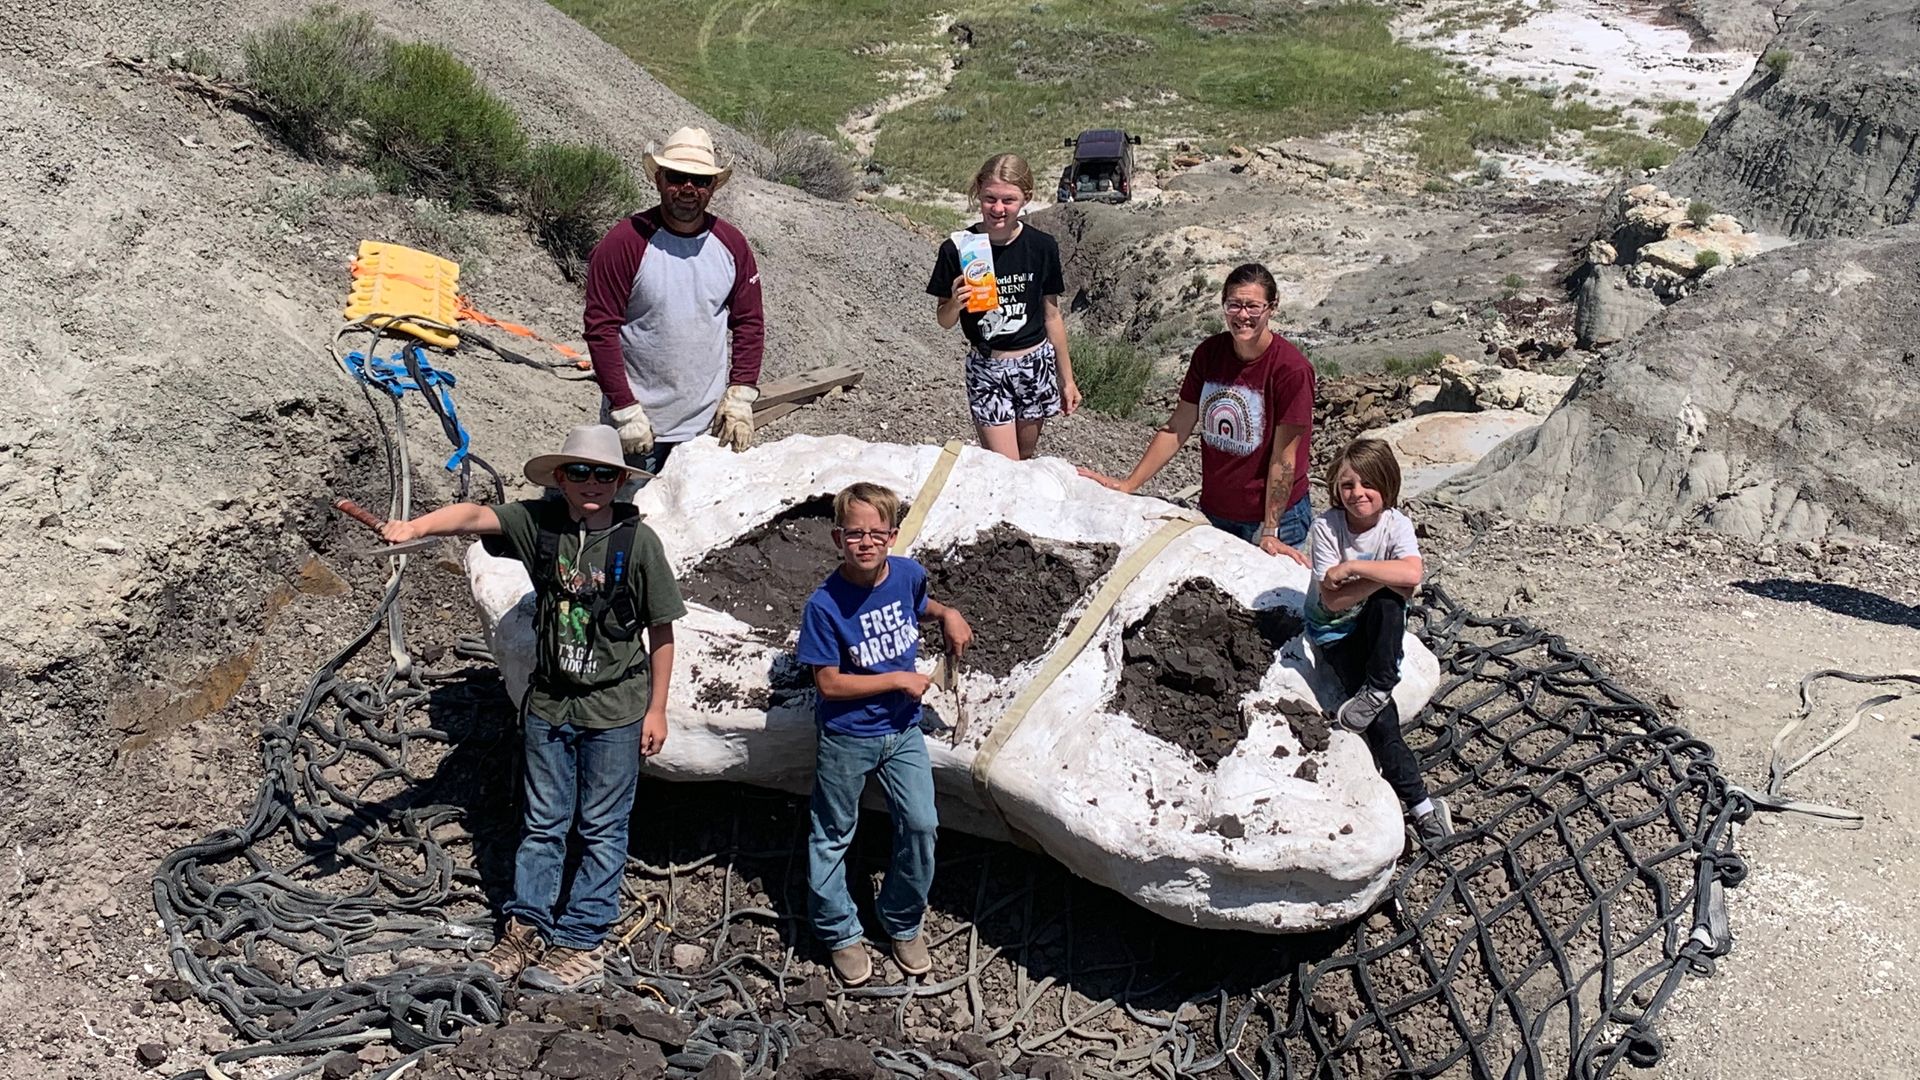 A rare adolescent T. Rex fossil was discovered by three kids in North Dakota. It will be displayed in Denver in June.